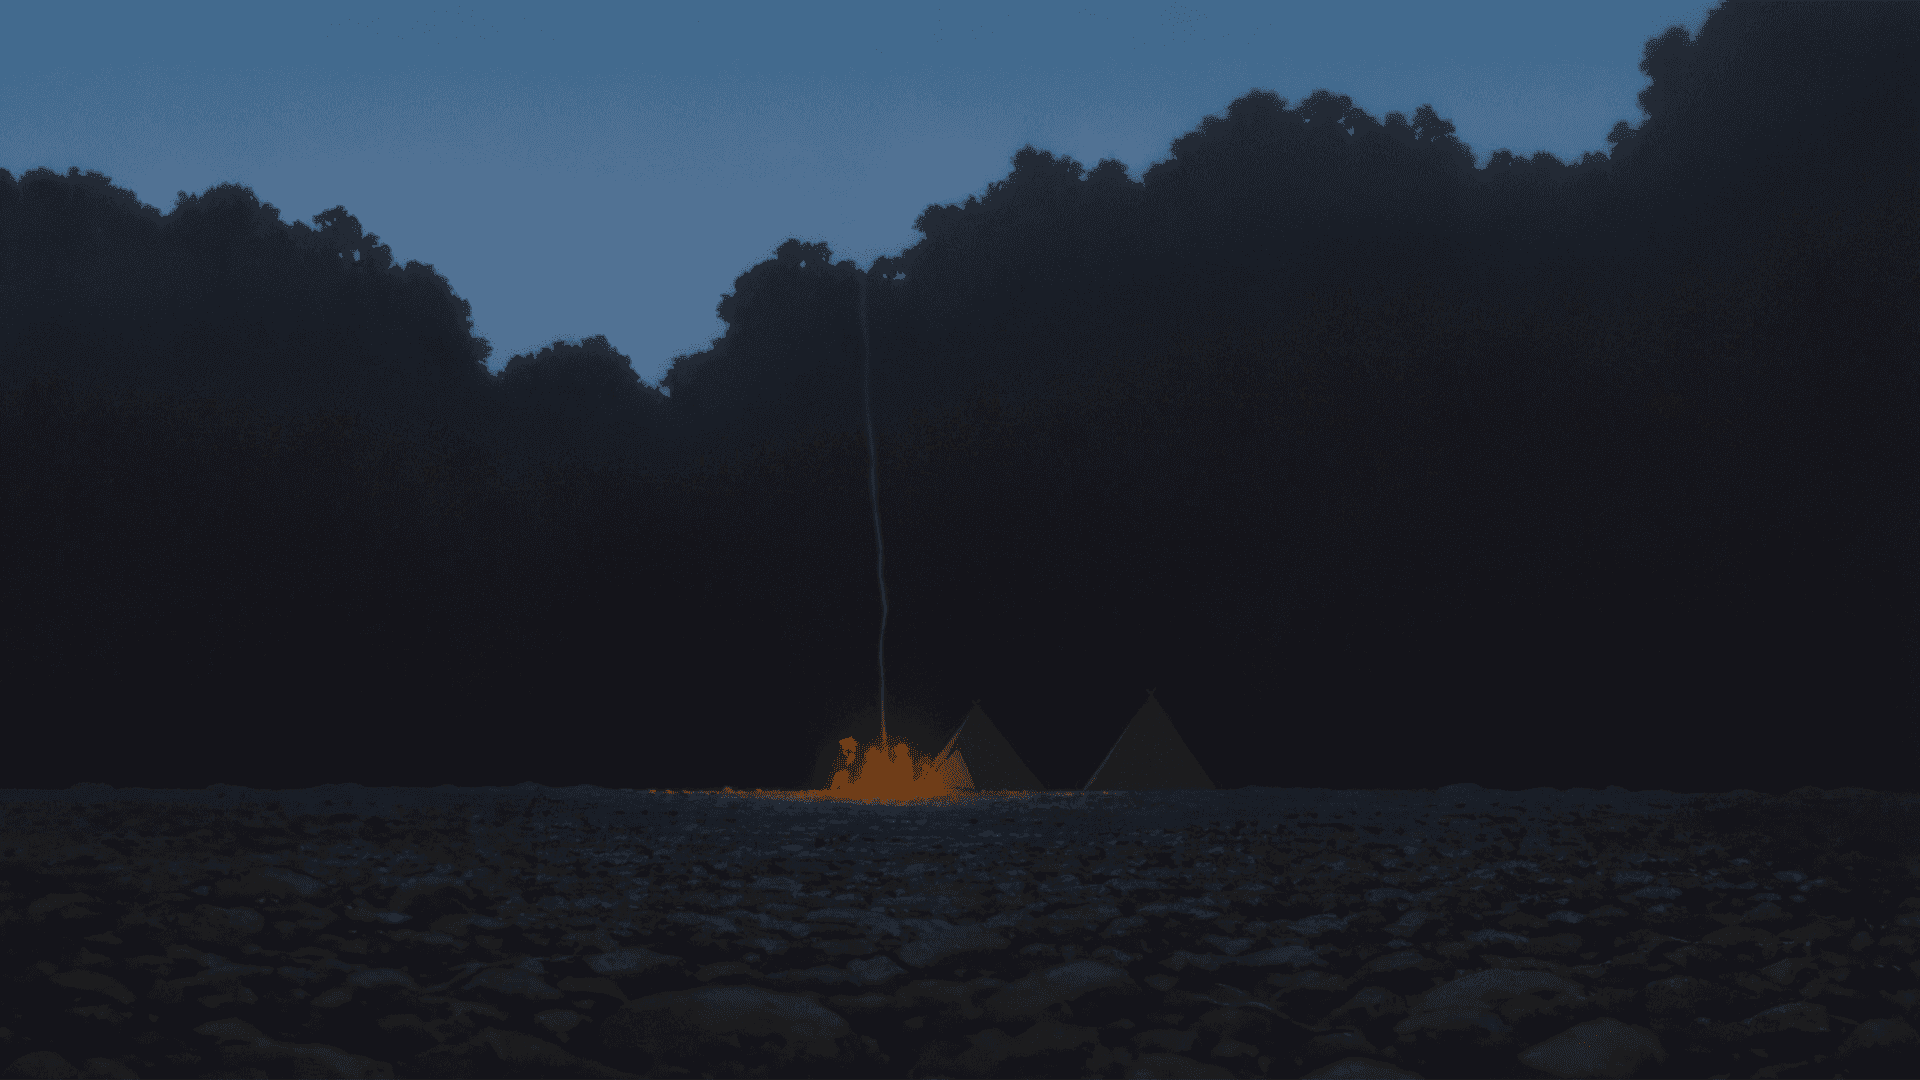 A Campfire In The Middle Of The Night